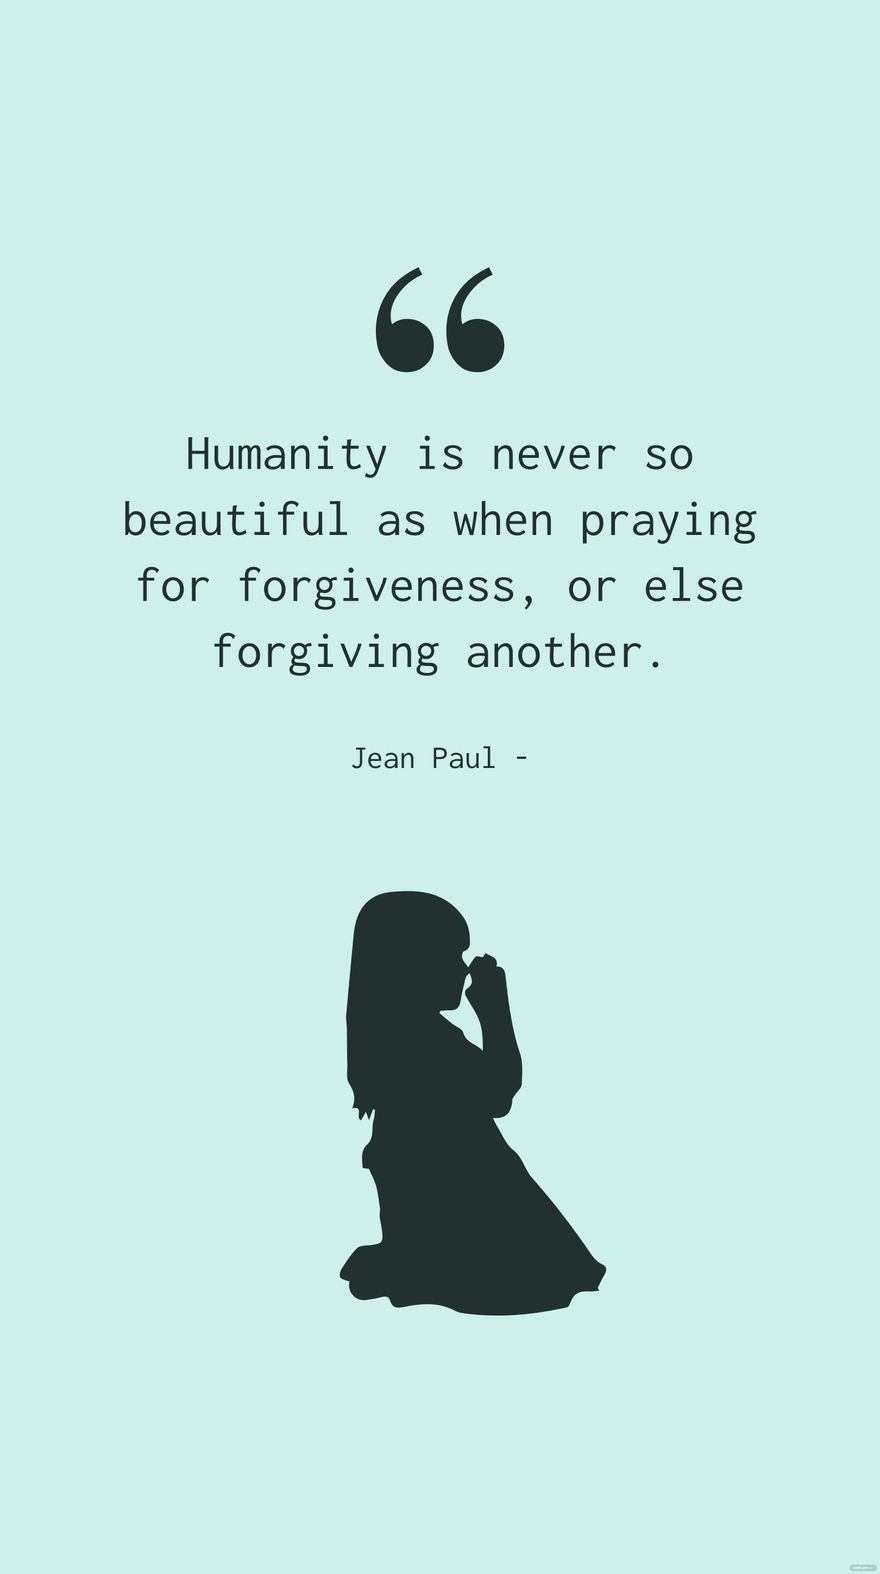 Jean Paul - Humanity is never so beautiful as when praying for forgiveness, or else forgiving another.